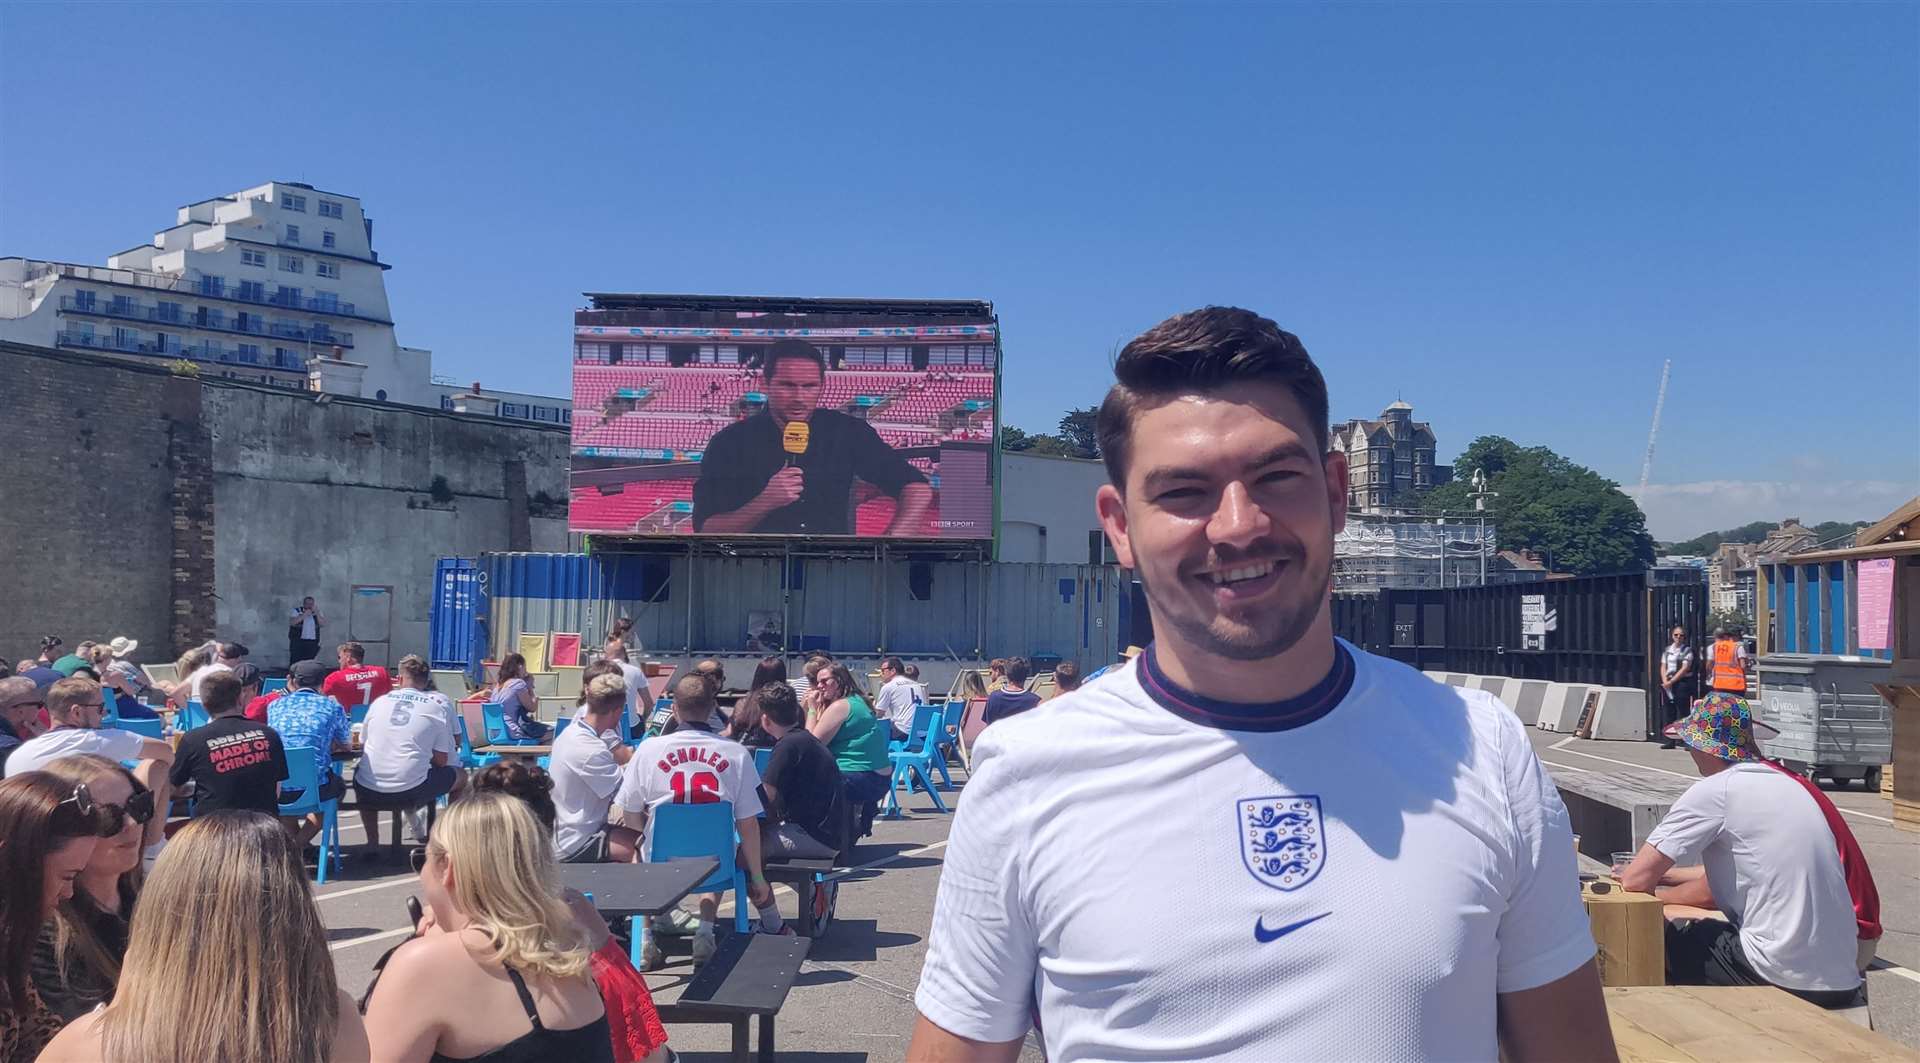 England fan Cade Mortimer was one of hundreds watching the game at Folkestone Harbour Arm